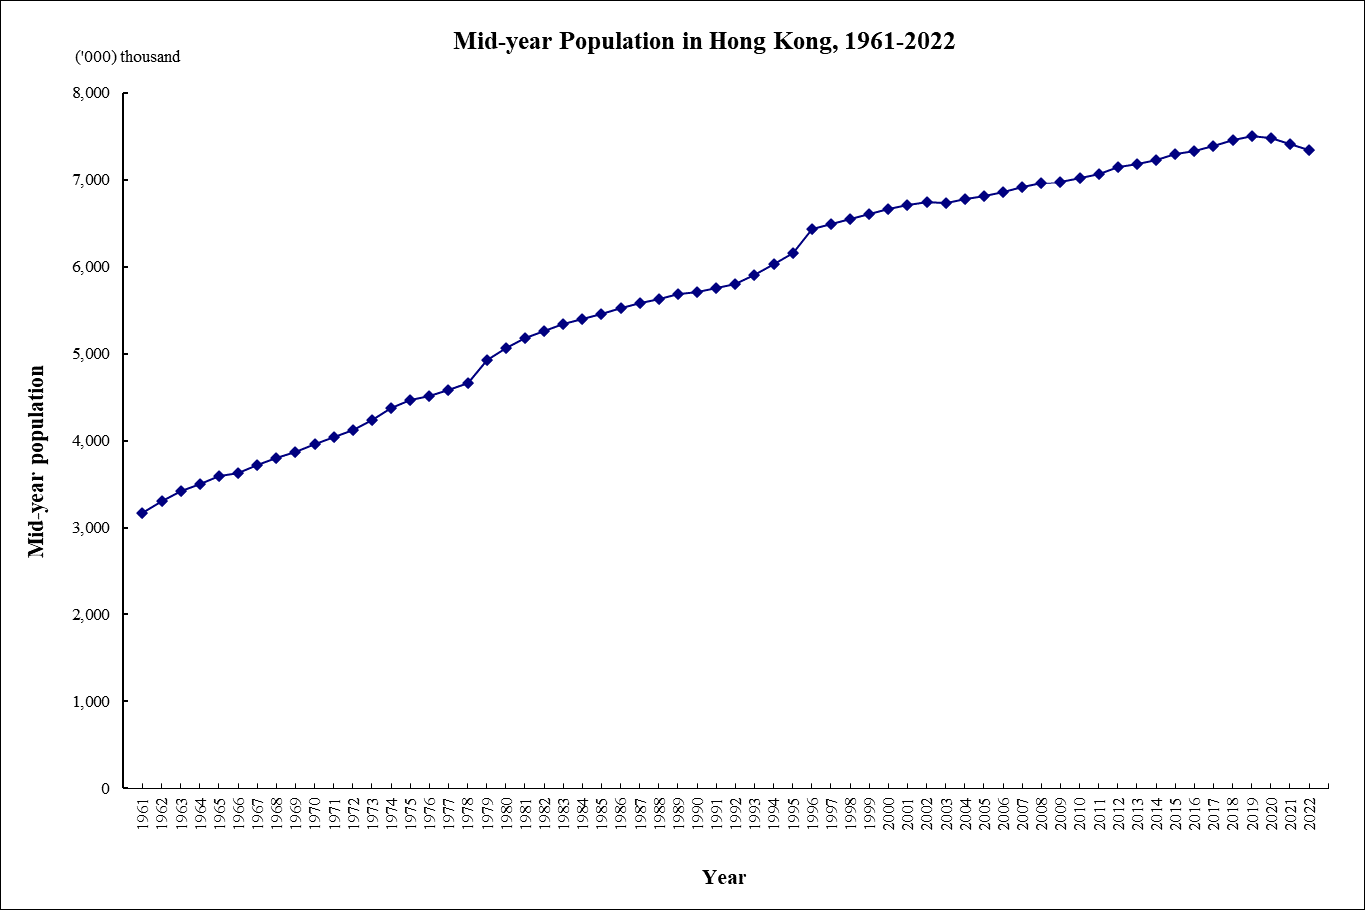 Regular population census in Hong Kong had been conducted since year